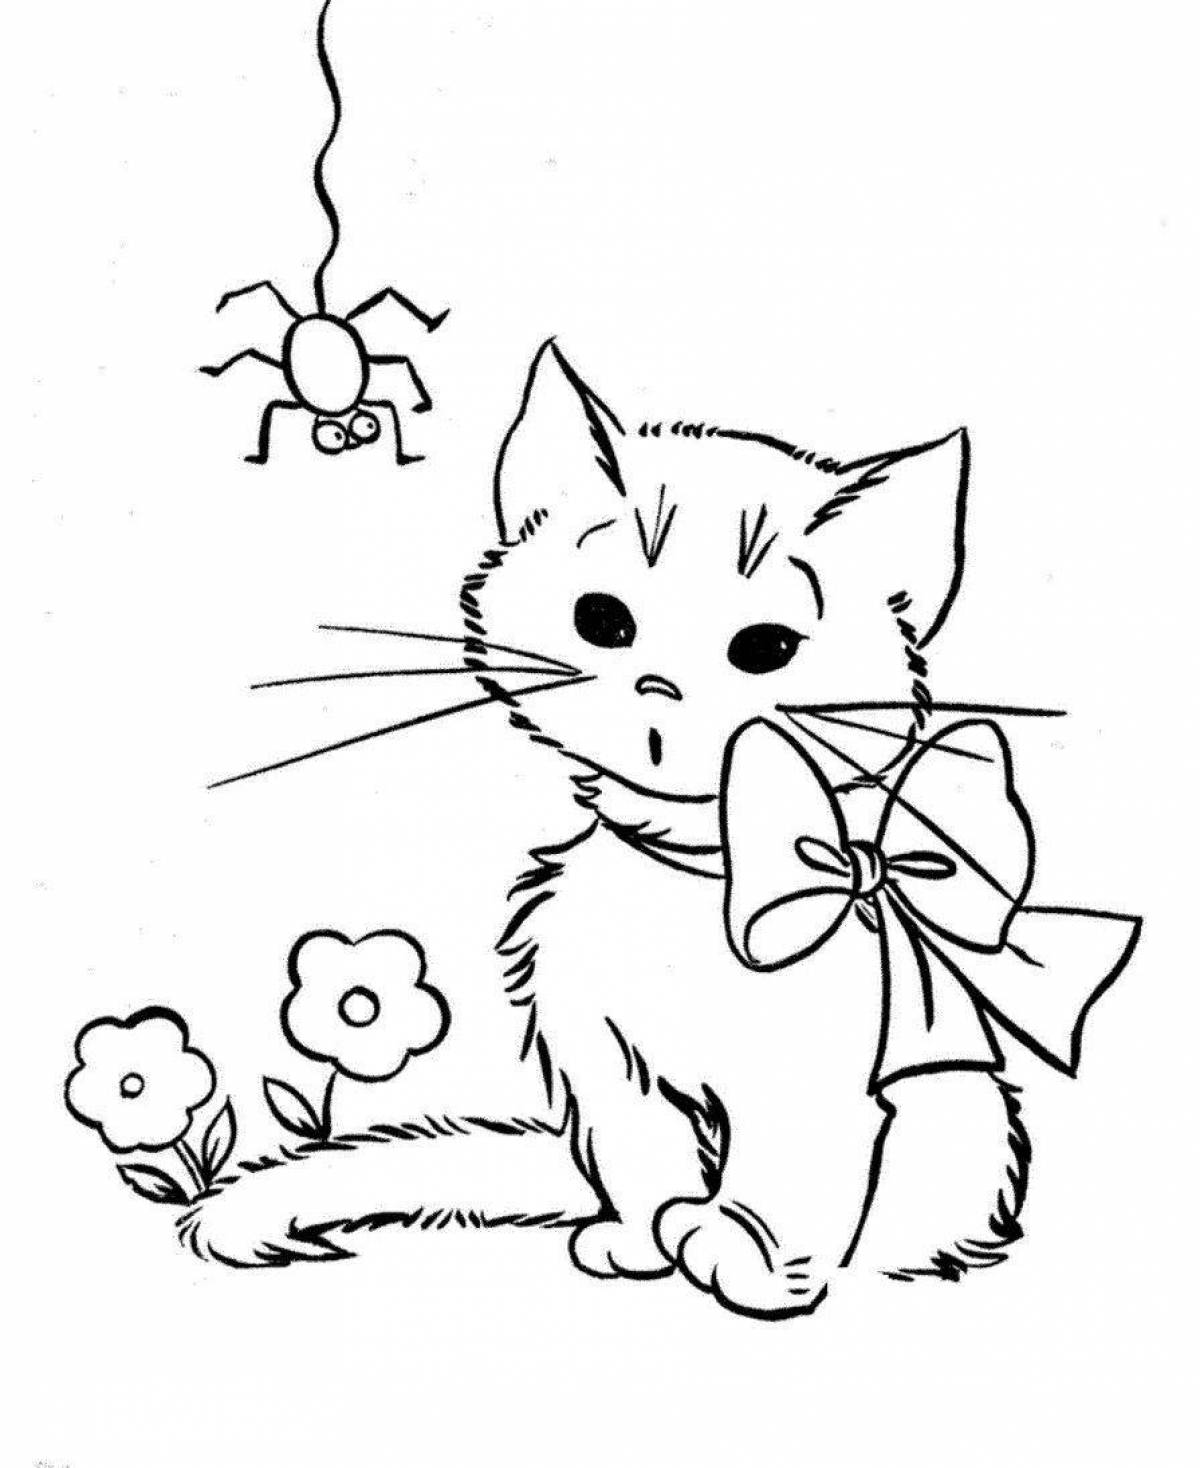 Coloring book smiling little kitty